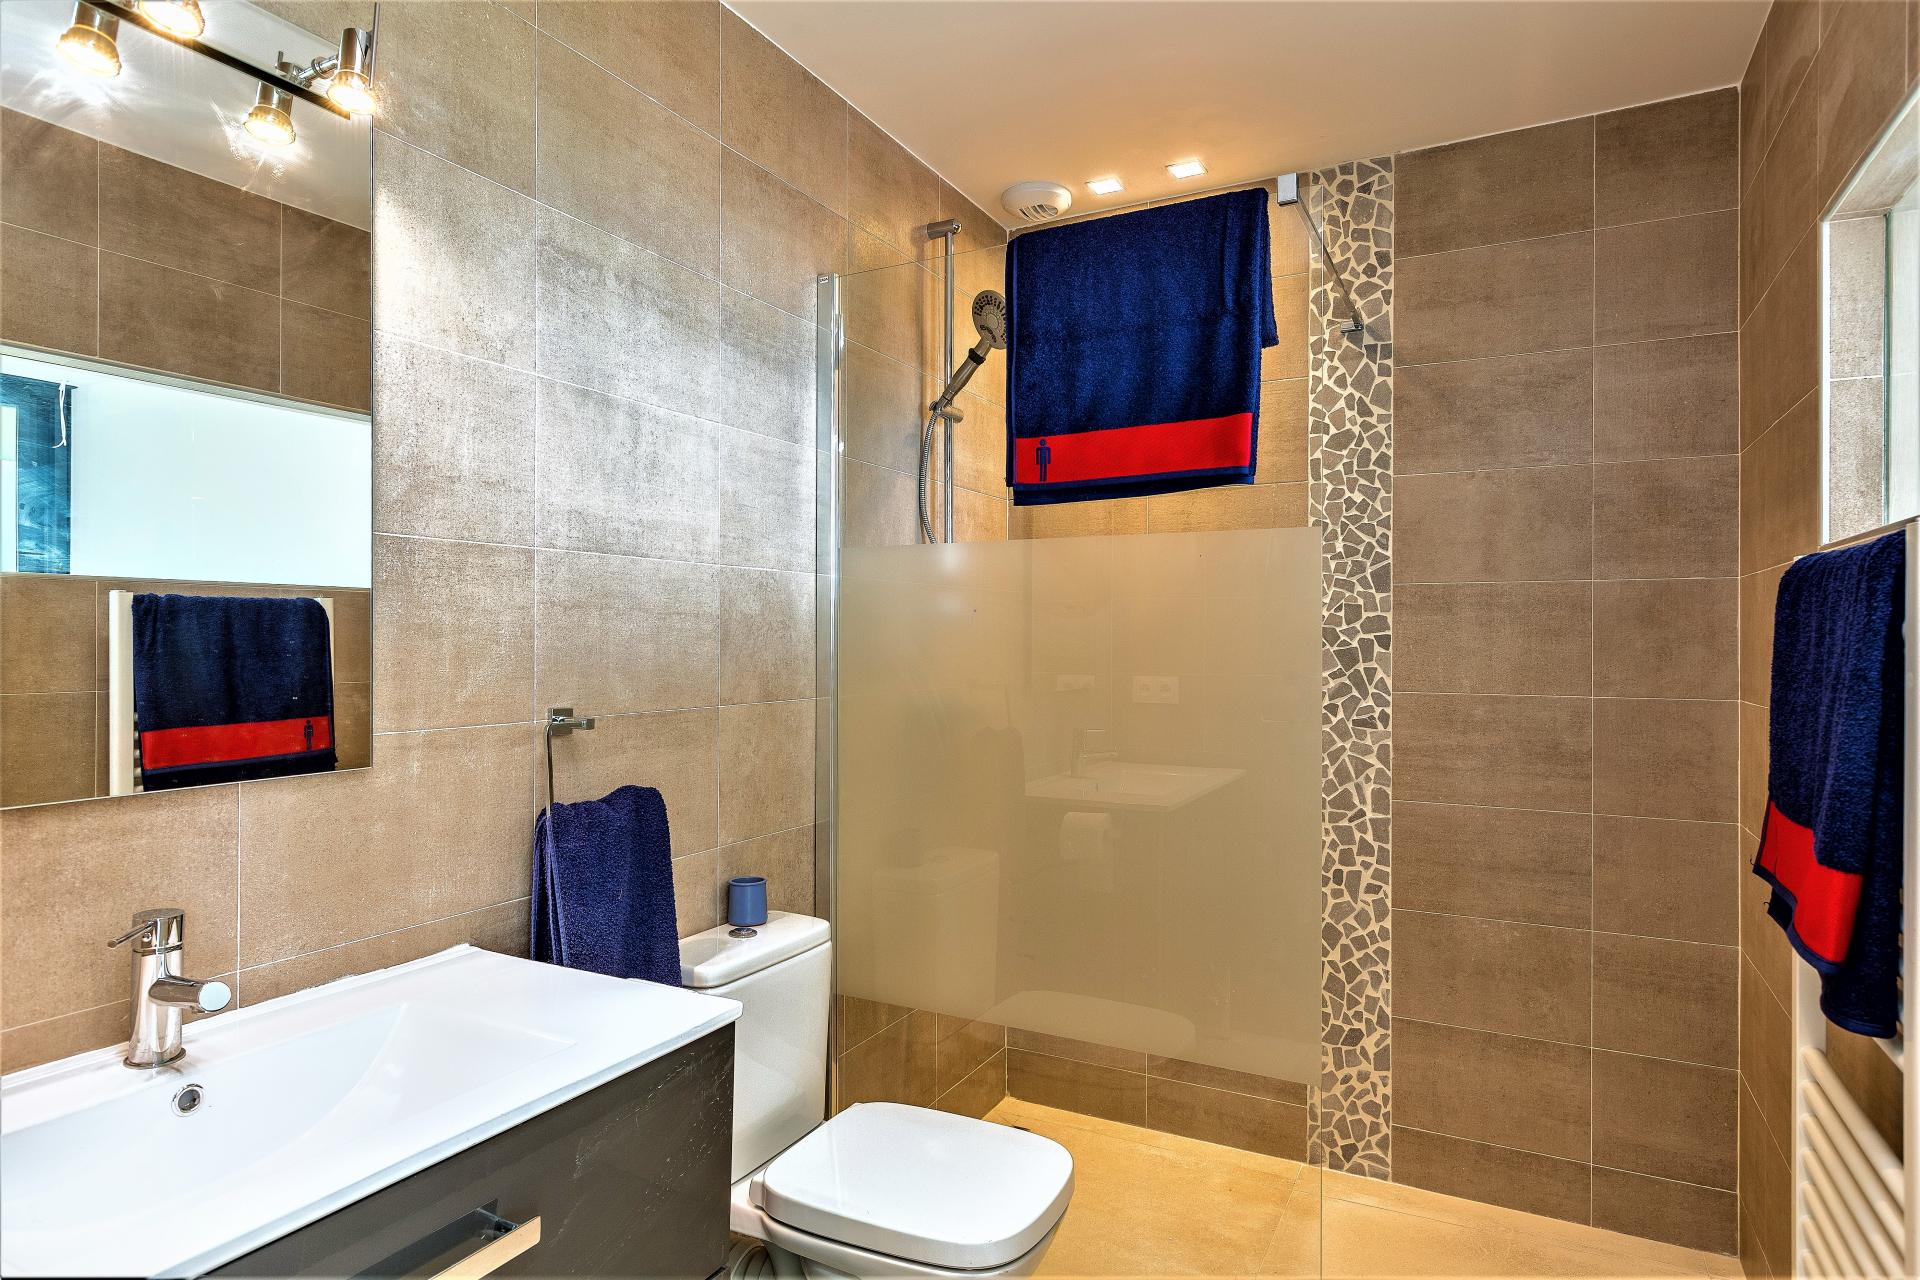 BATHROOM WITH WALKING SHOWER IN VILLA INFINITY HOLIDAY RENTAL IN EZE COTE D AZUR SOUTH OF FRANCE